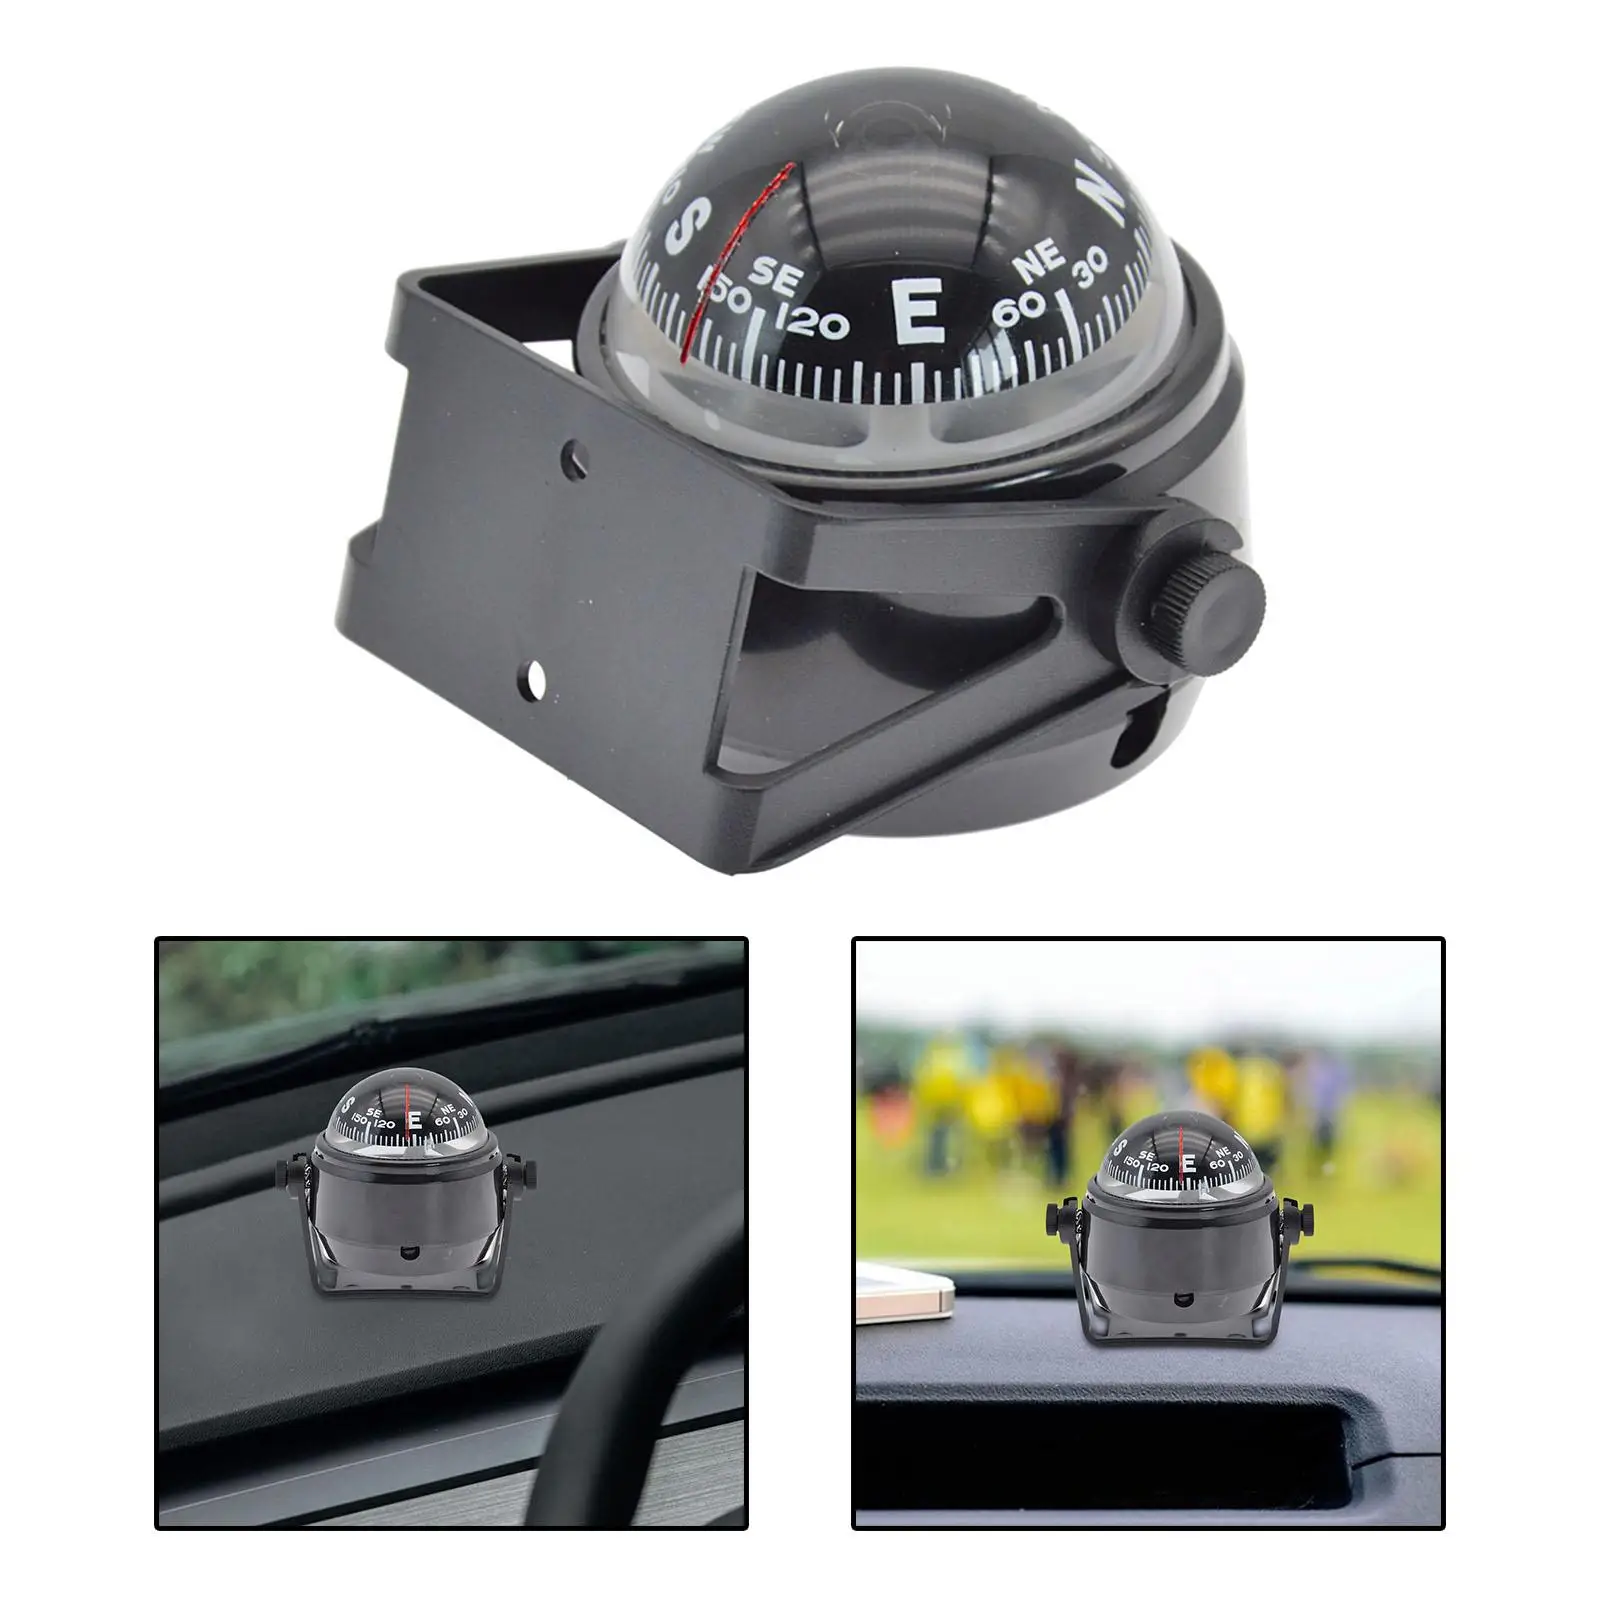 Car Compass Ball Adhesive Navigation Direction Guide for Marine Boat